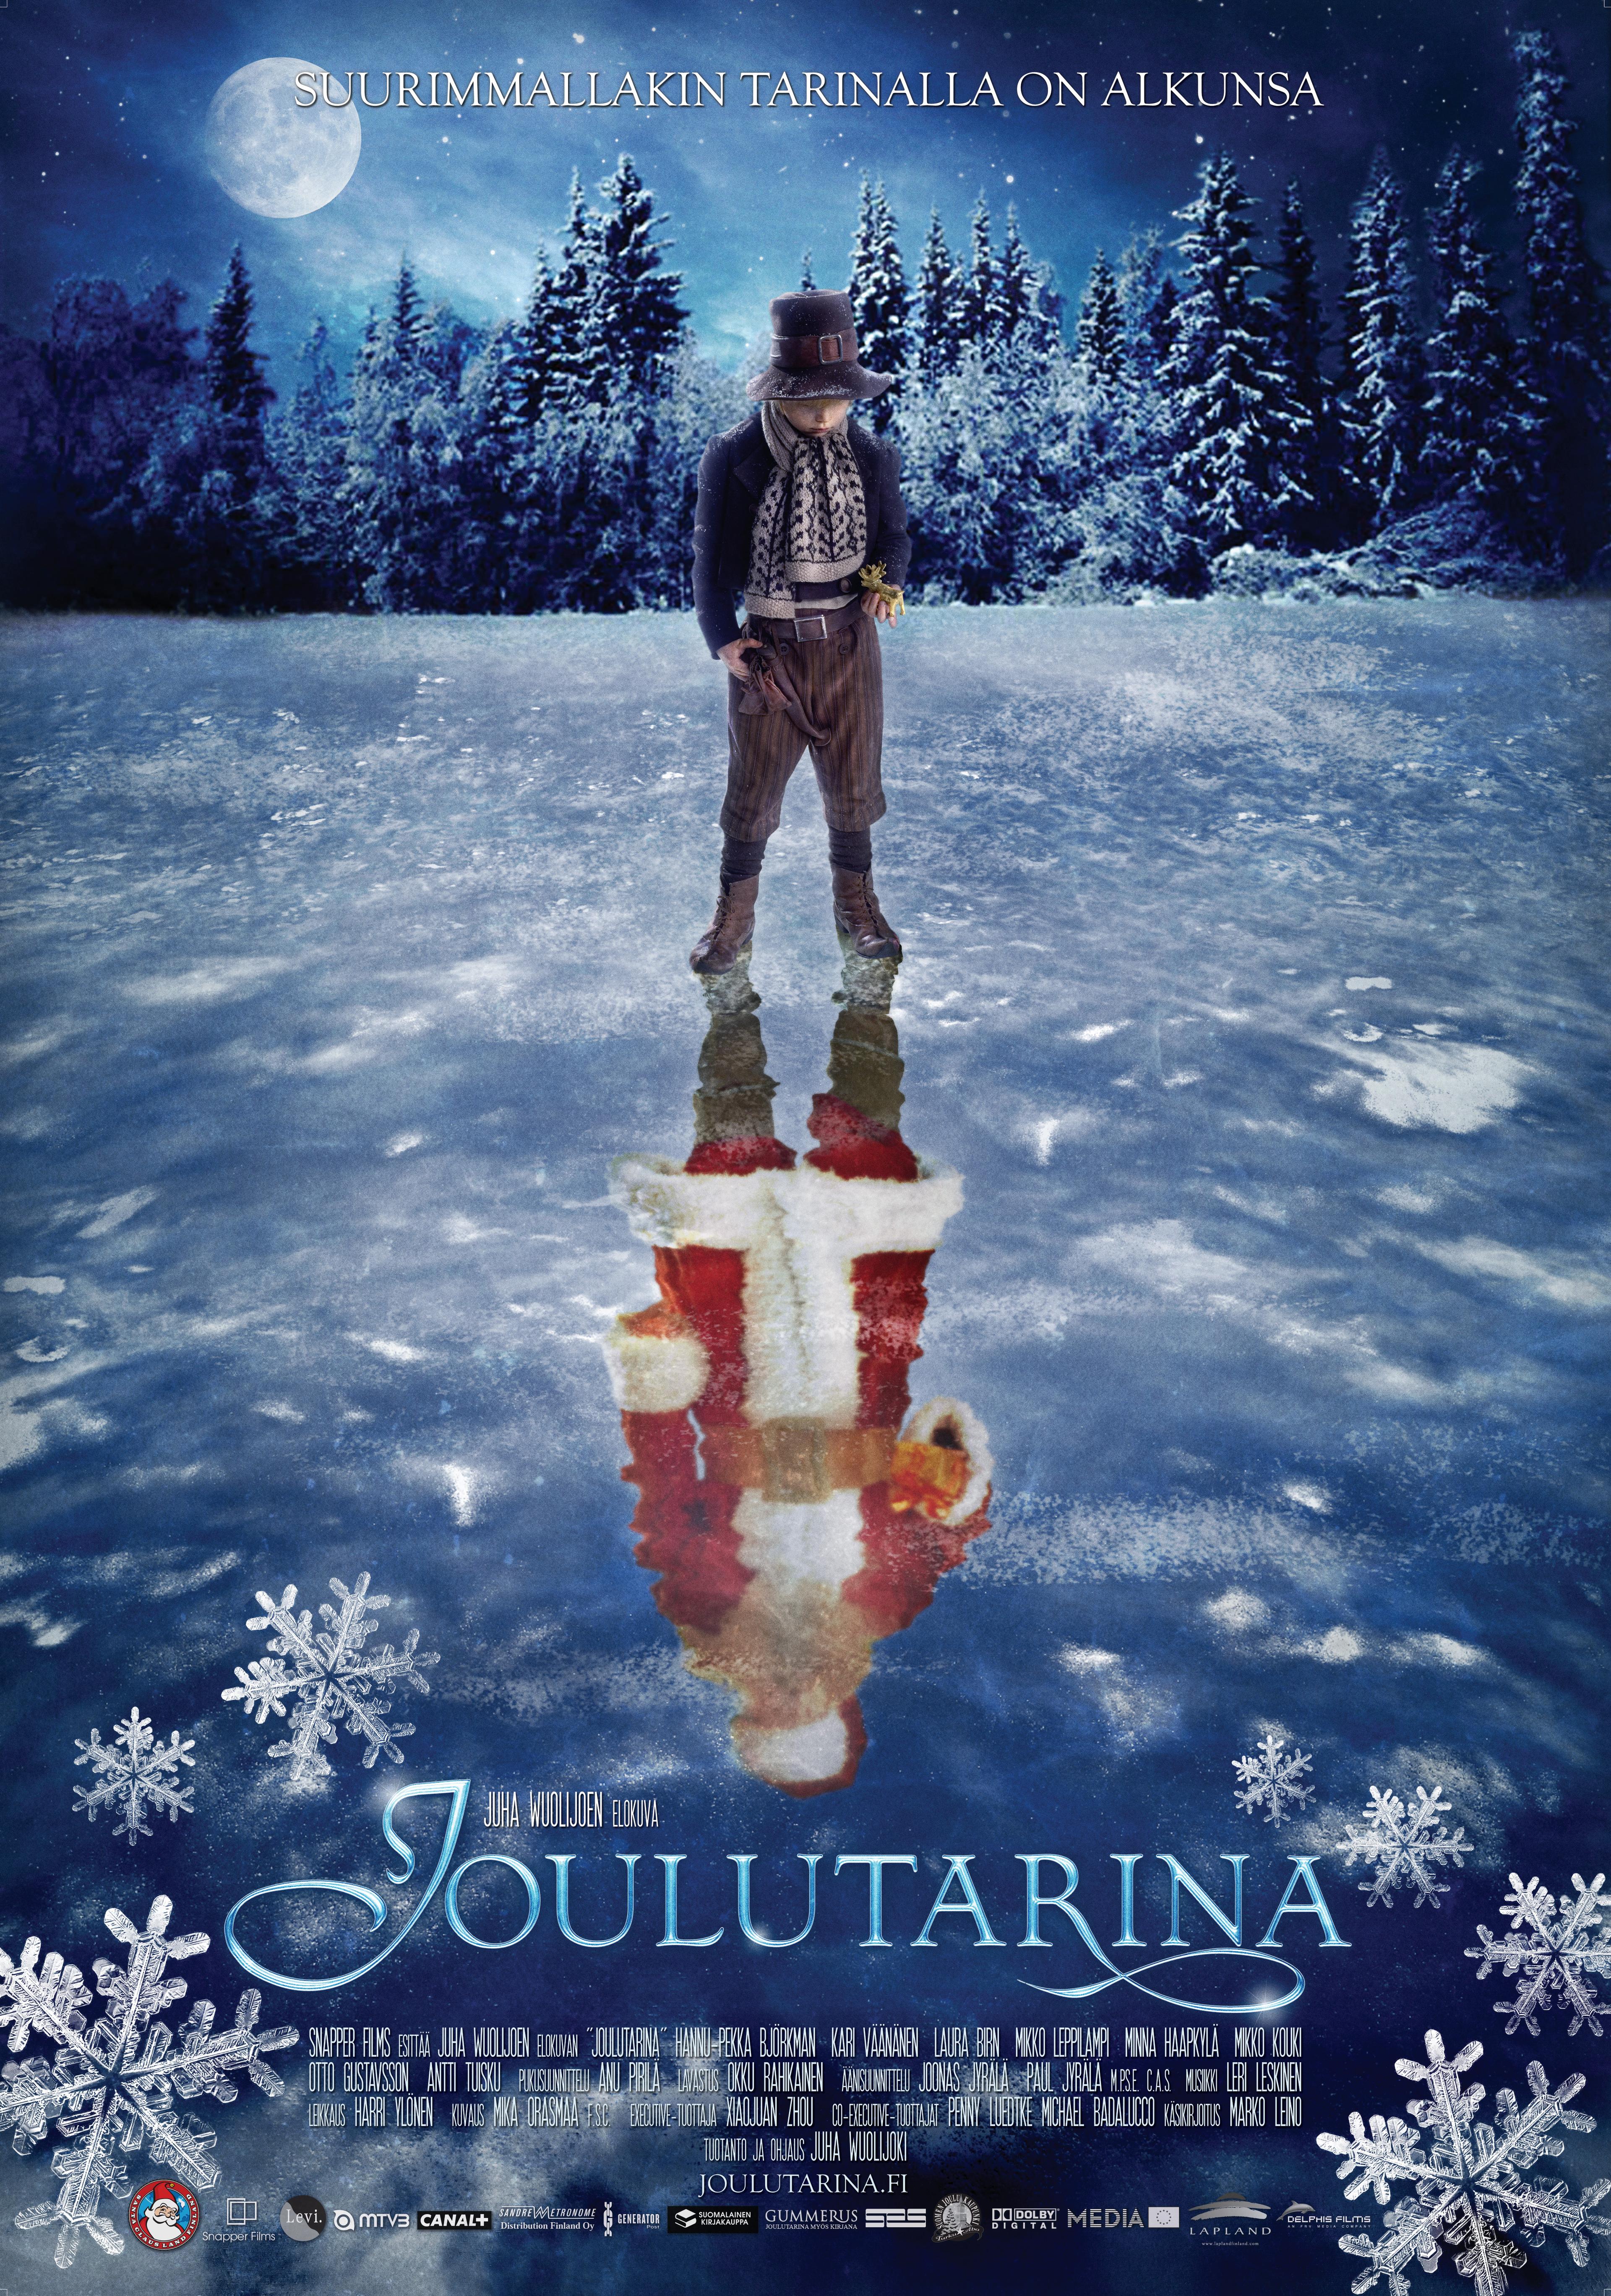 Cover image of this place Movie Joulutarina (2008)